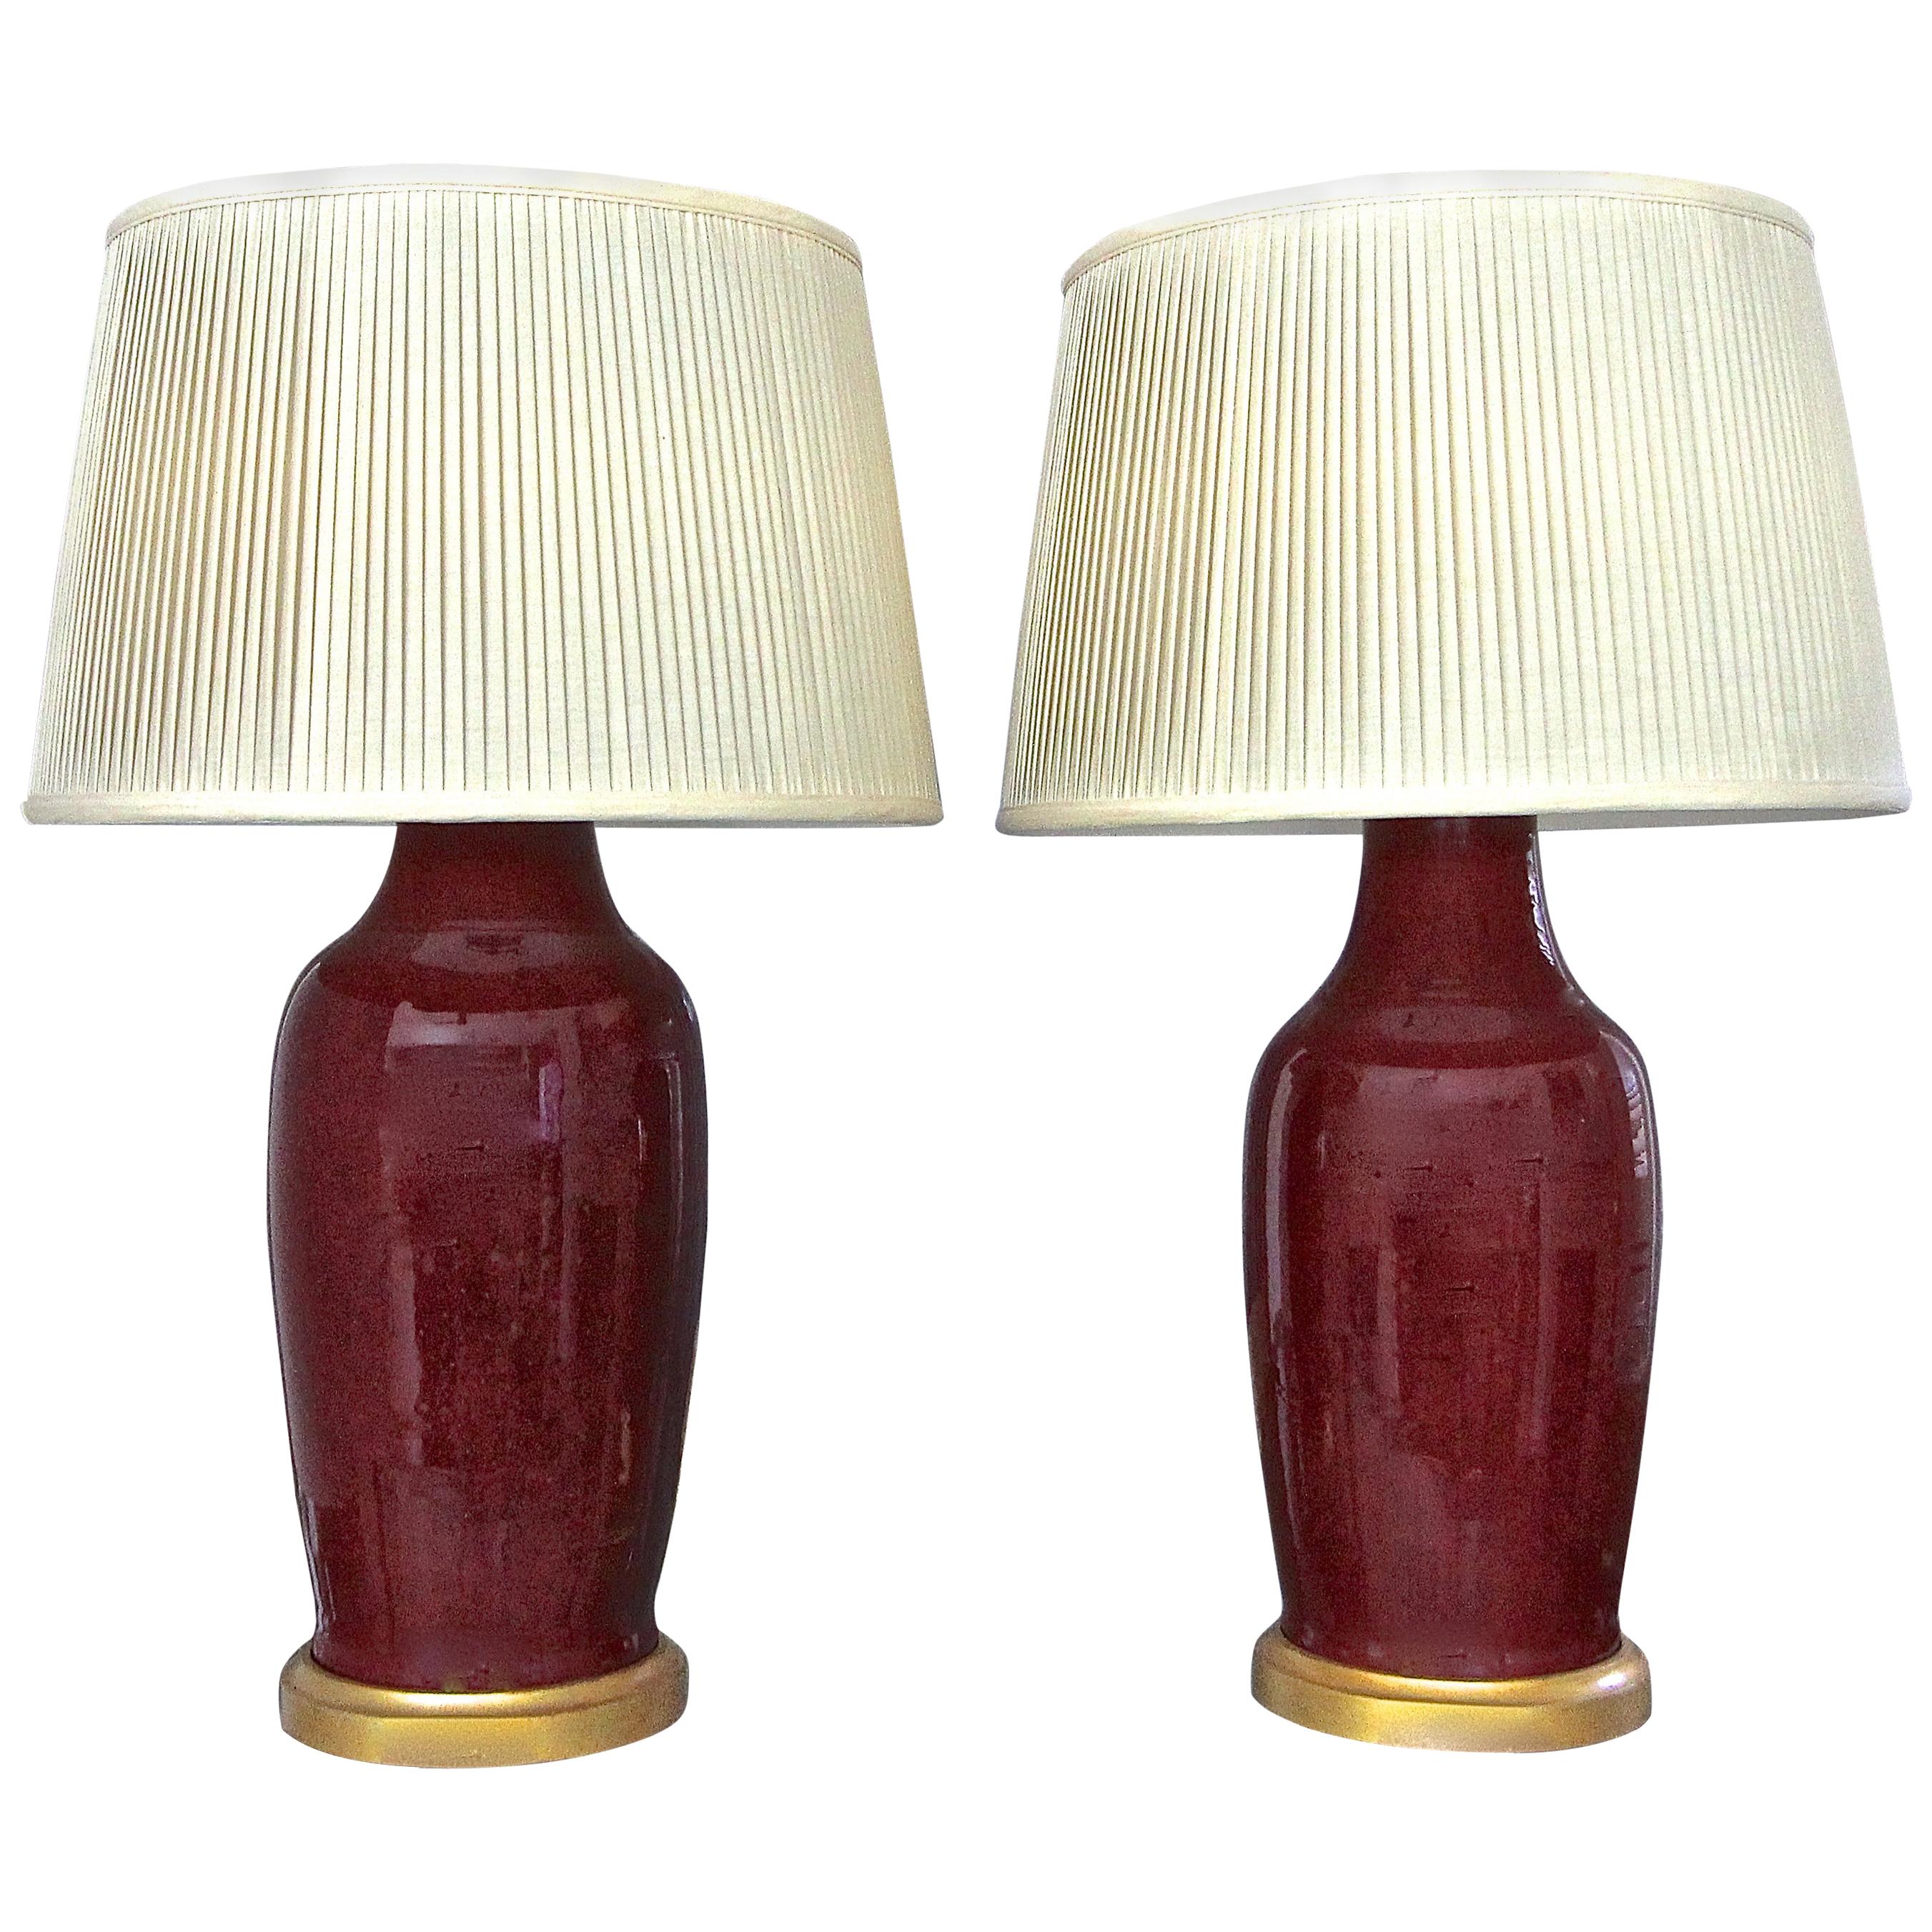 Pair 19th Century Chinese Sang De Boeuf Oxblood Porcelain Table Lamps